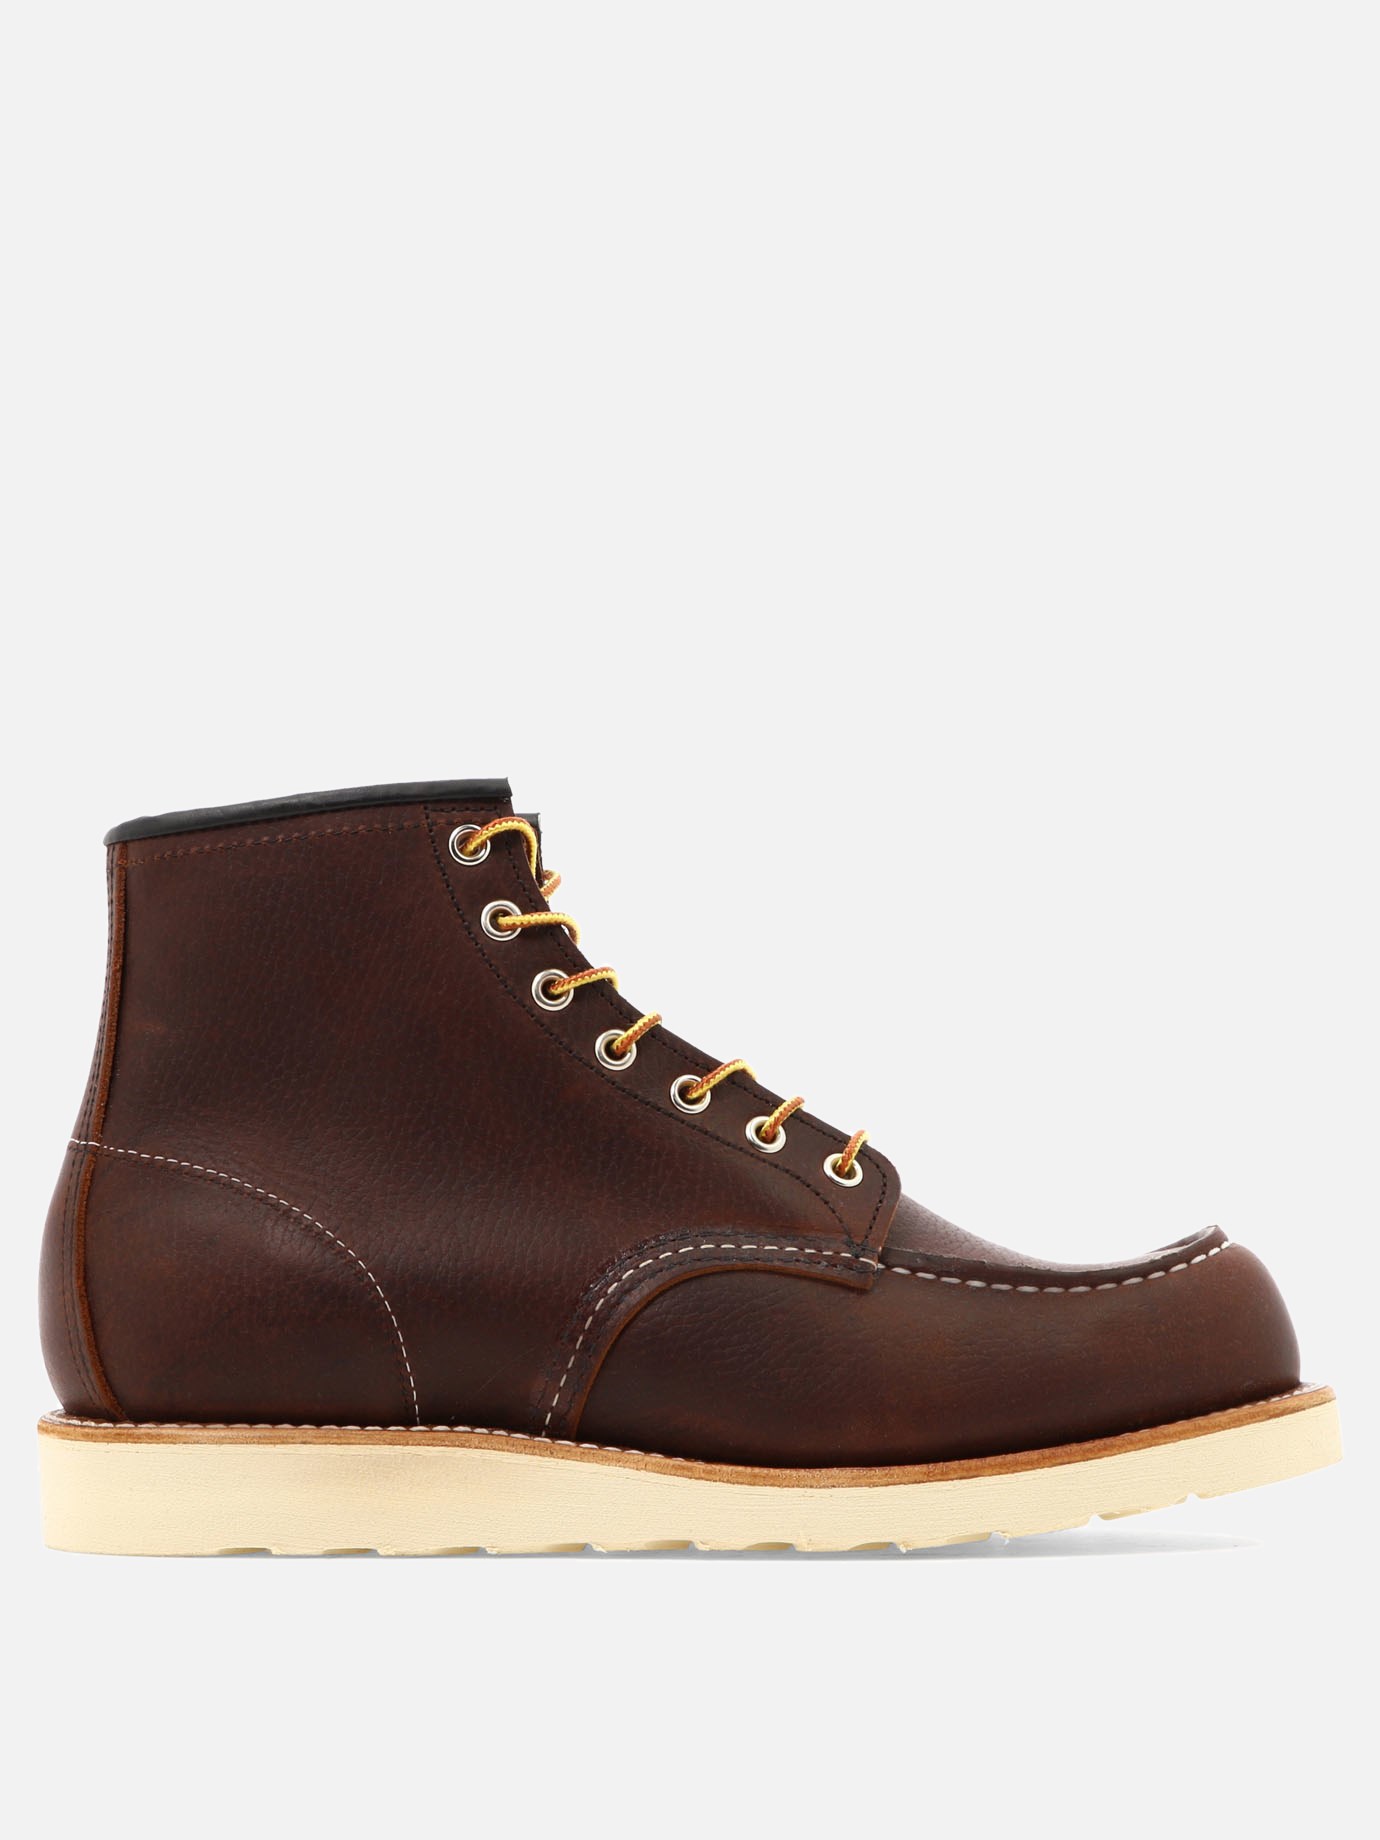  Classic Moc  ankle bootsby Red Wing Shoes - 0